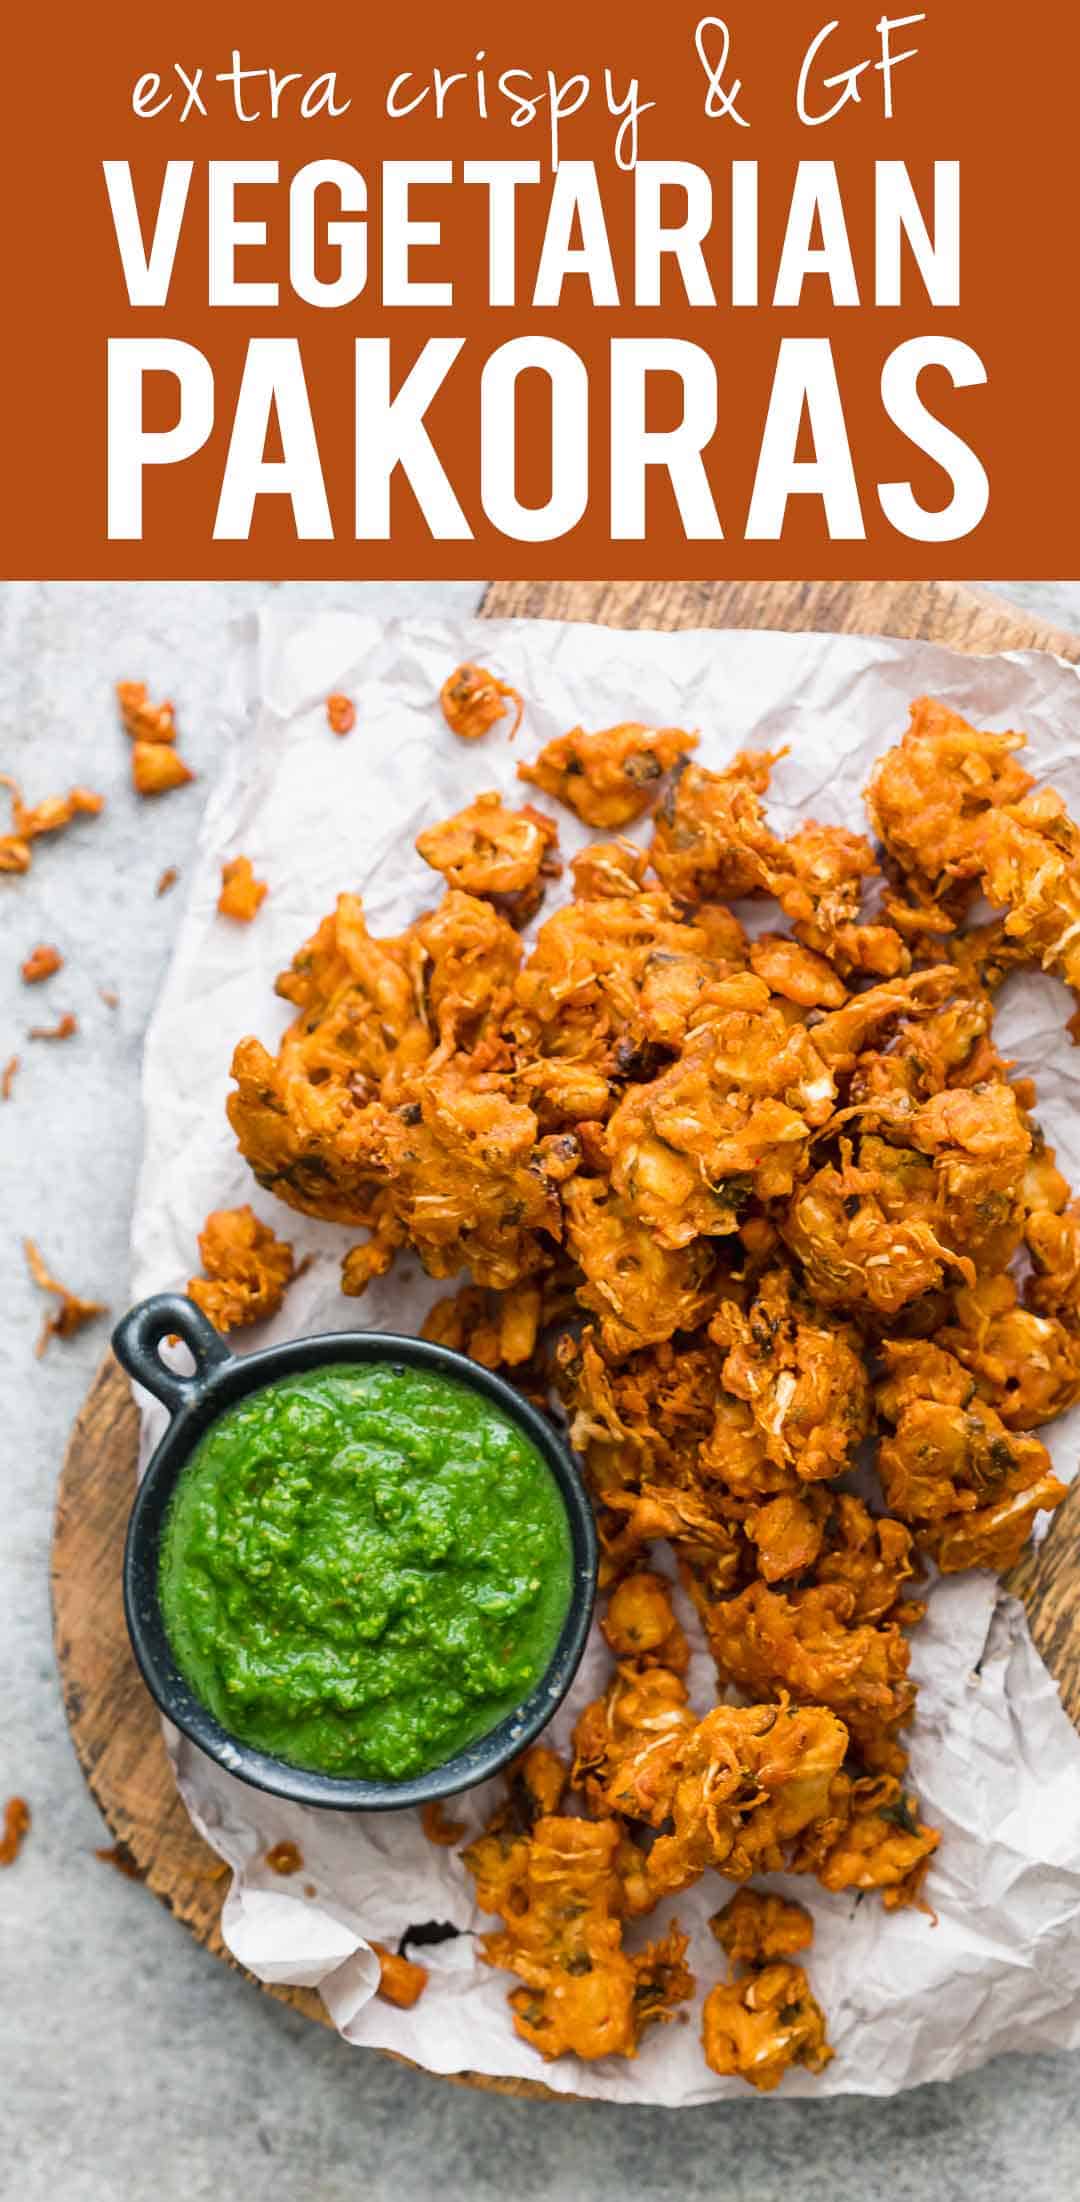 Vegetable Pakoras - Super crispy GF fritters that disappear in minutes!